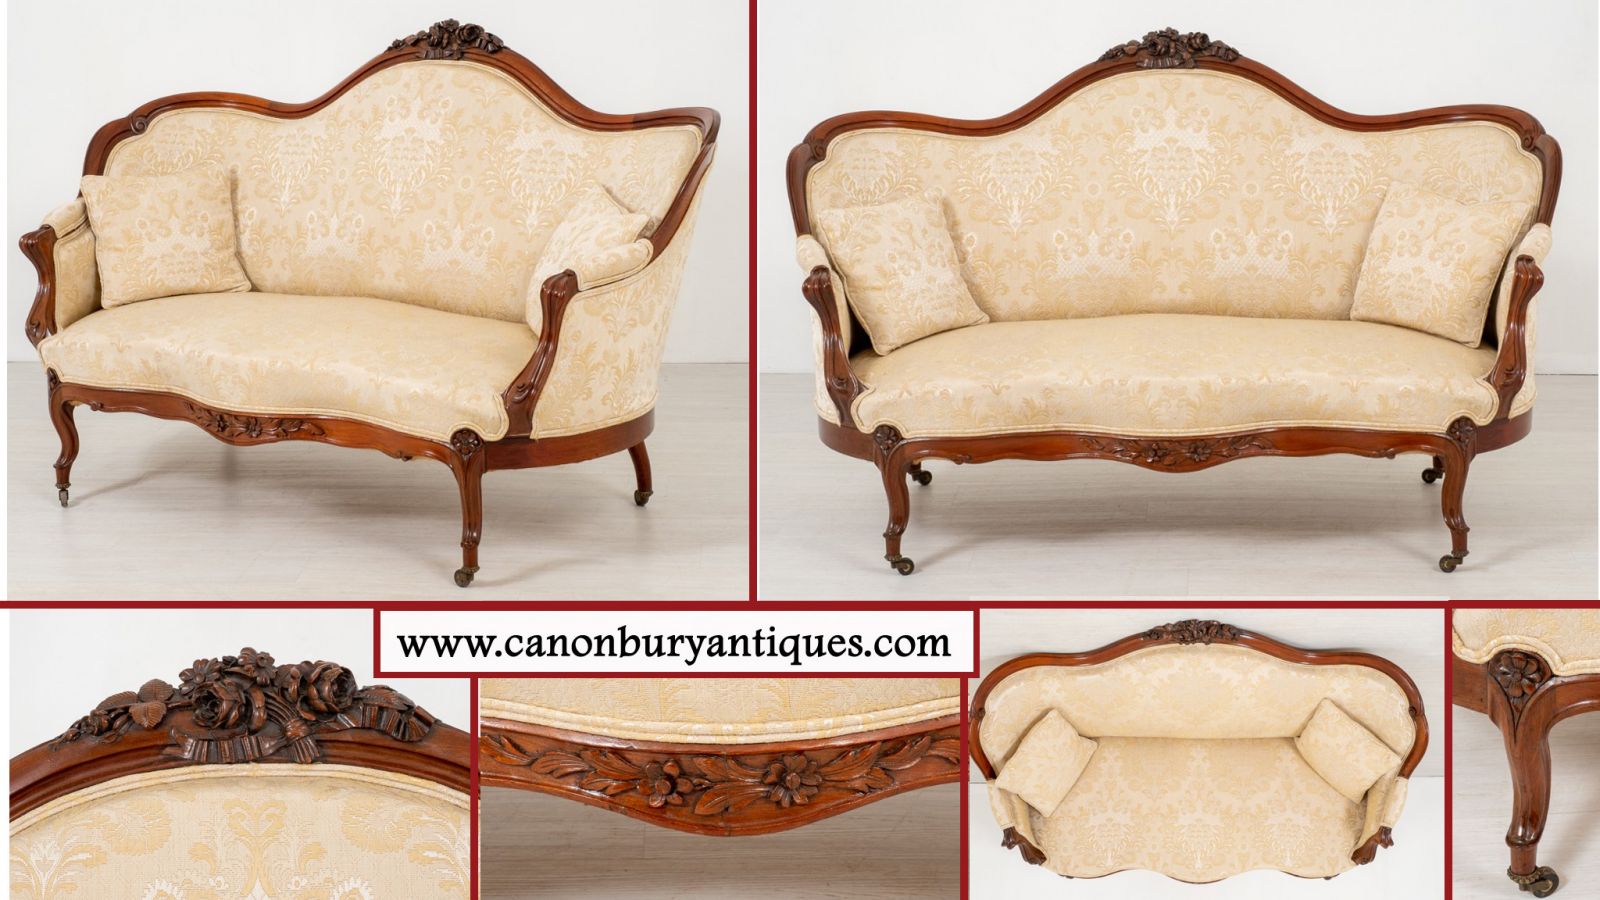 Antique Settee And Couches A Guide, Styles Of Antique Sofas